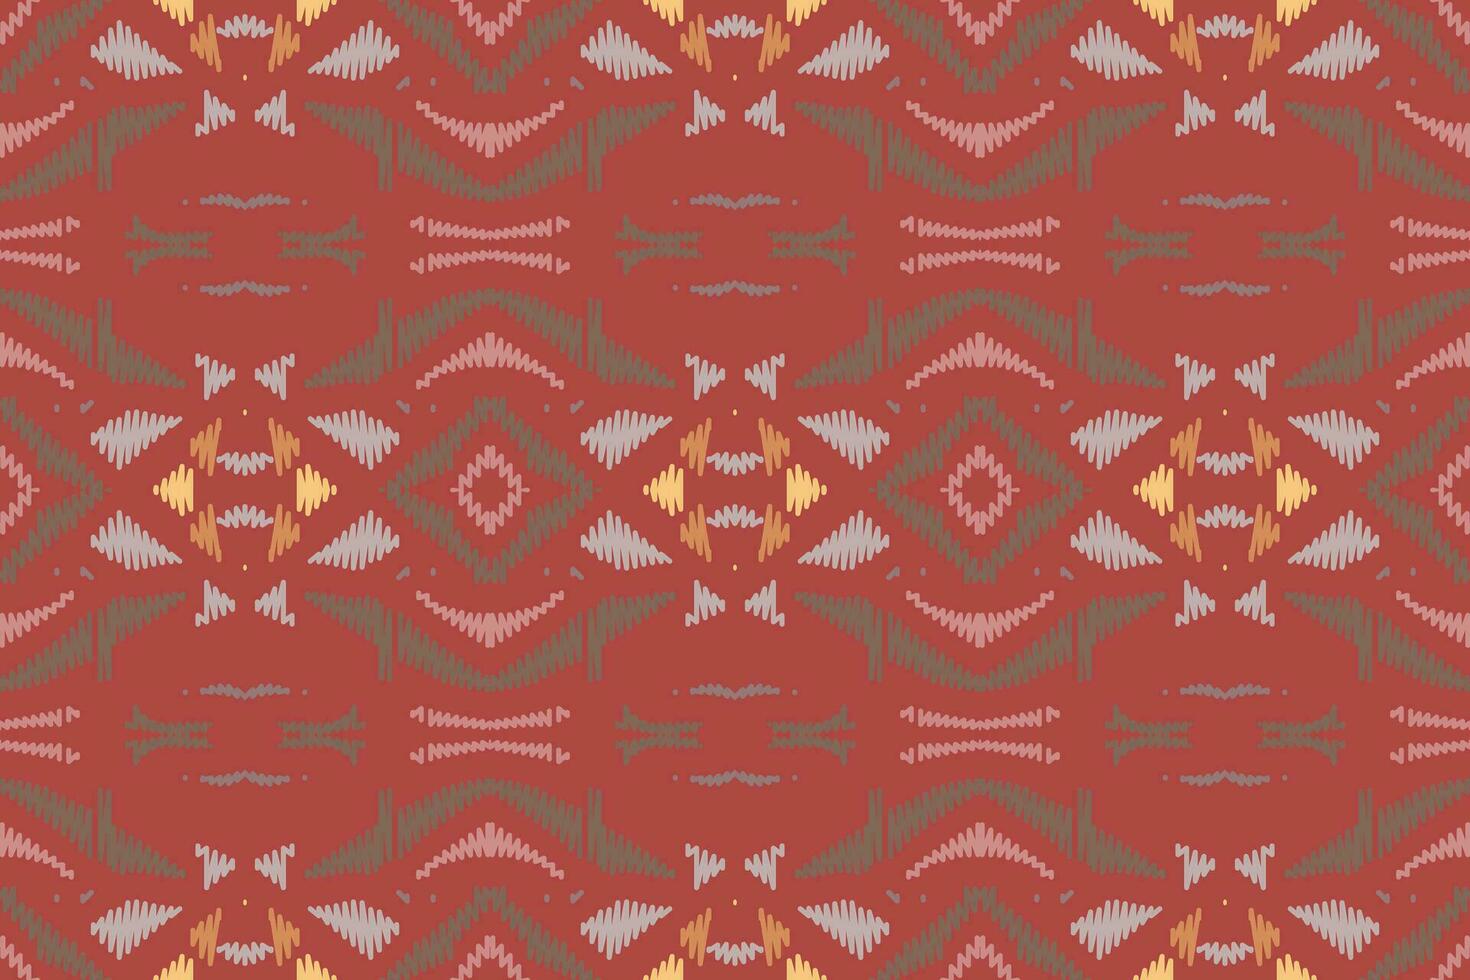 Motif Ikat Paisley Embroidery Background. Ikat Frame Geometric Ethnic Oriental Pattern traditional.aztec Style Abstract Vector illustration.design for Texture,fabric,clothing,wrapping,sarong.